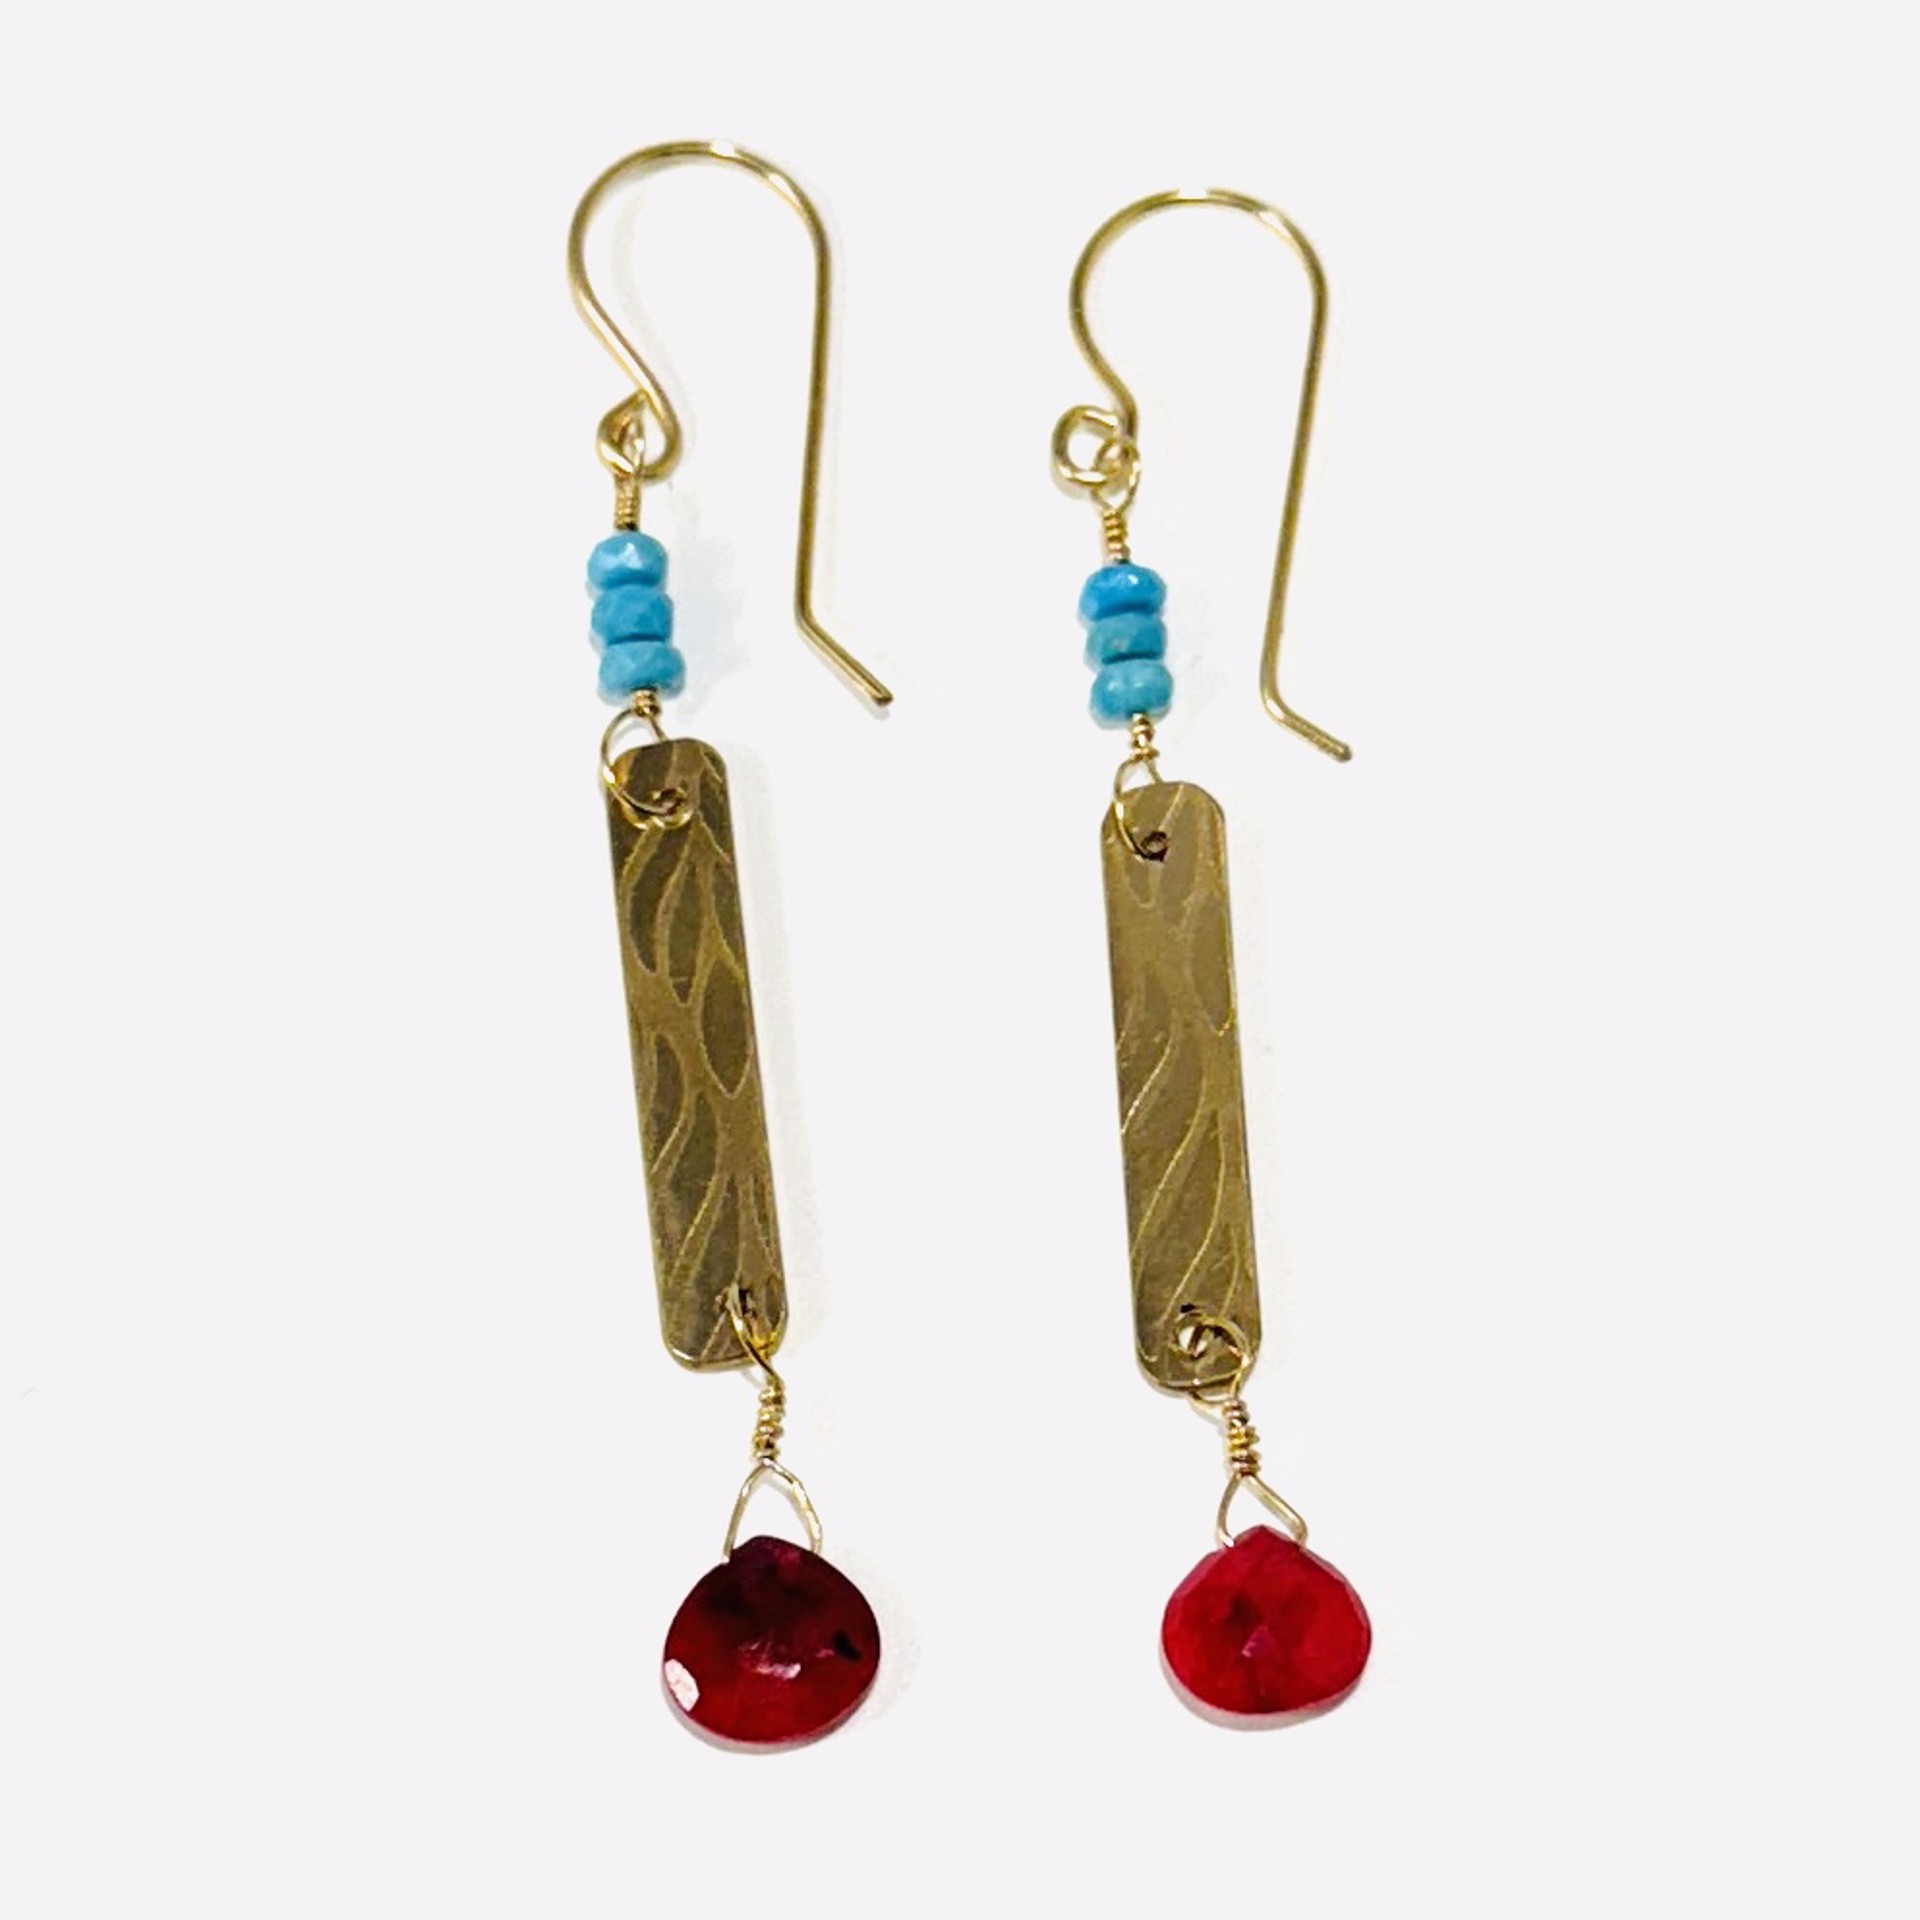 Sleeping Beauty Turquoise Beads, Ruby Drop, 14Kgf Paddle Earrings AB23-90 by Anne Bivens